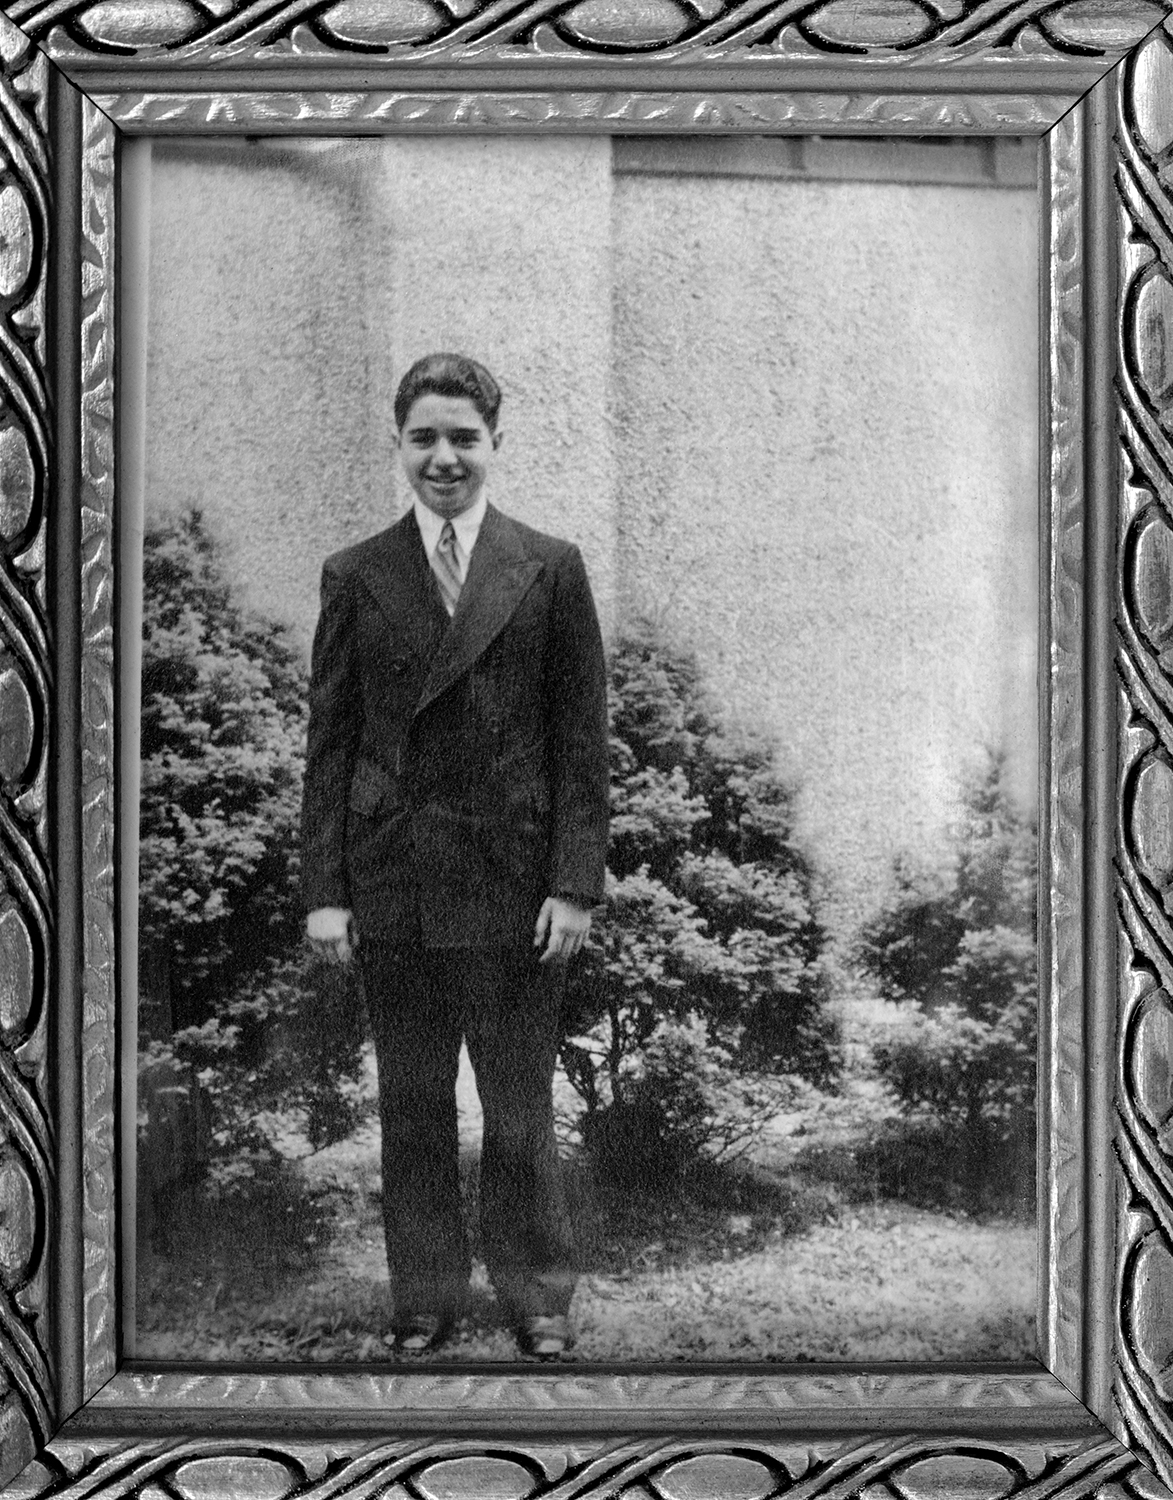 Martin Lazarus Greenberg (died at 19 during WWII)